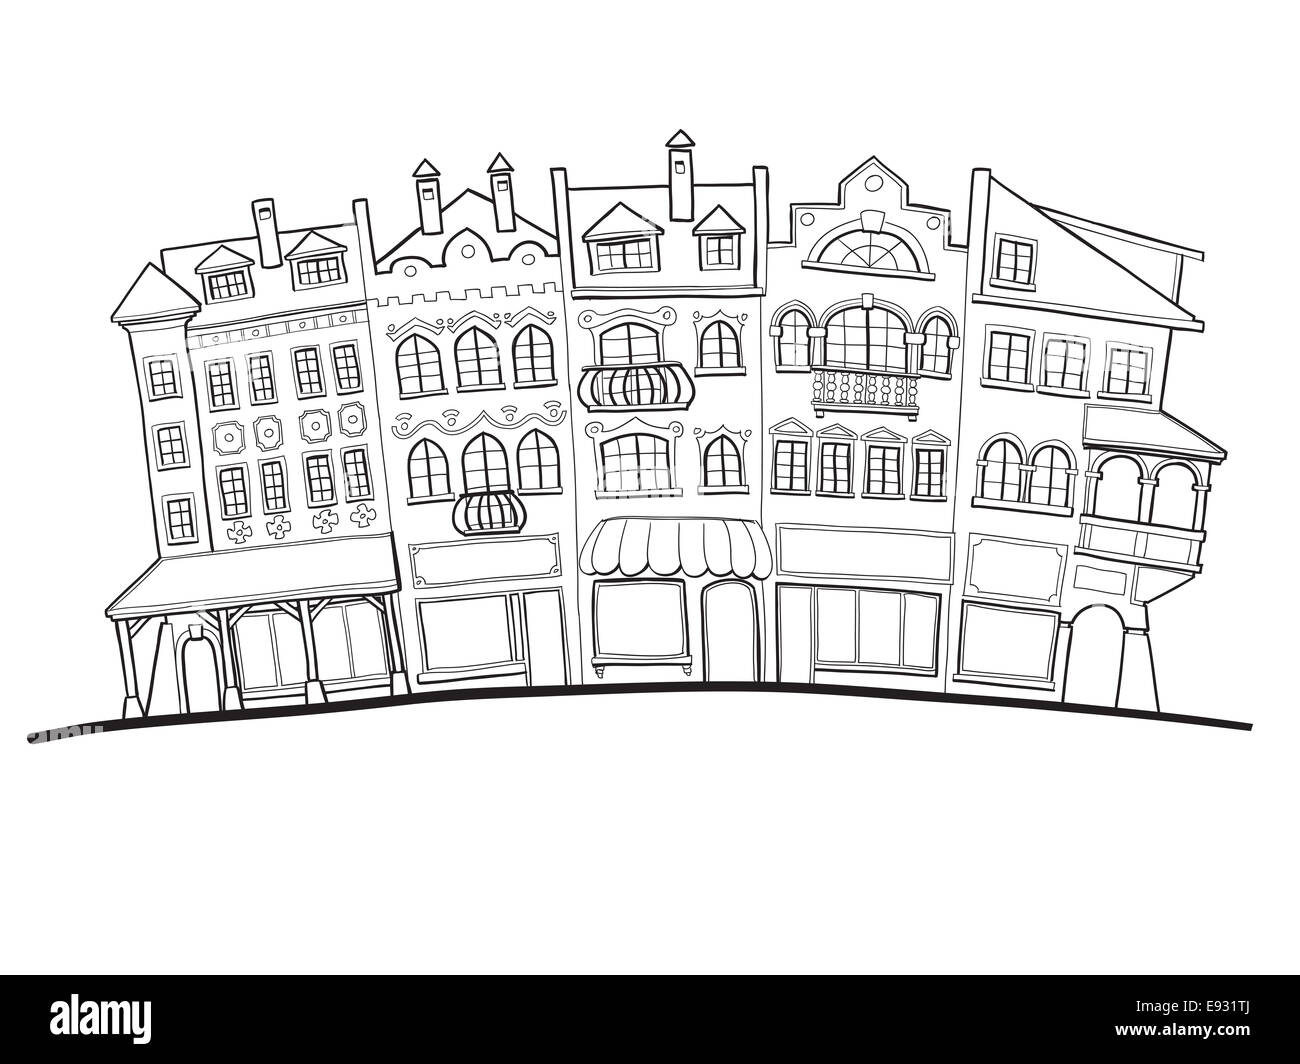 Drawing of old city street facades, houses and shops Stock Photo